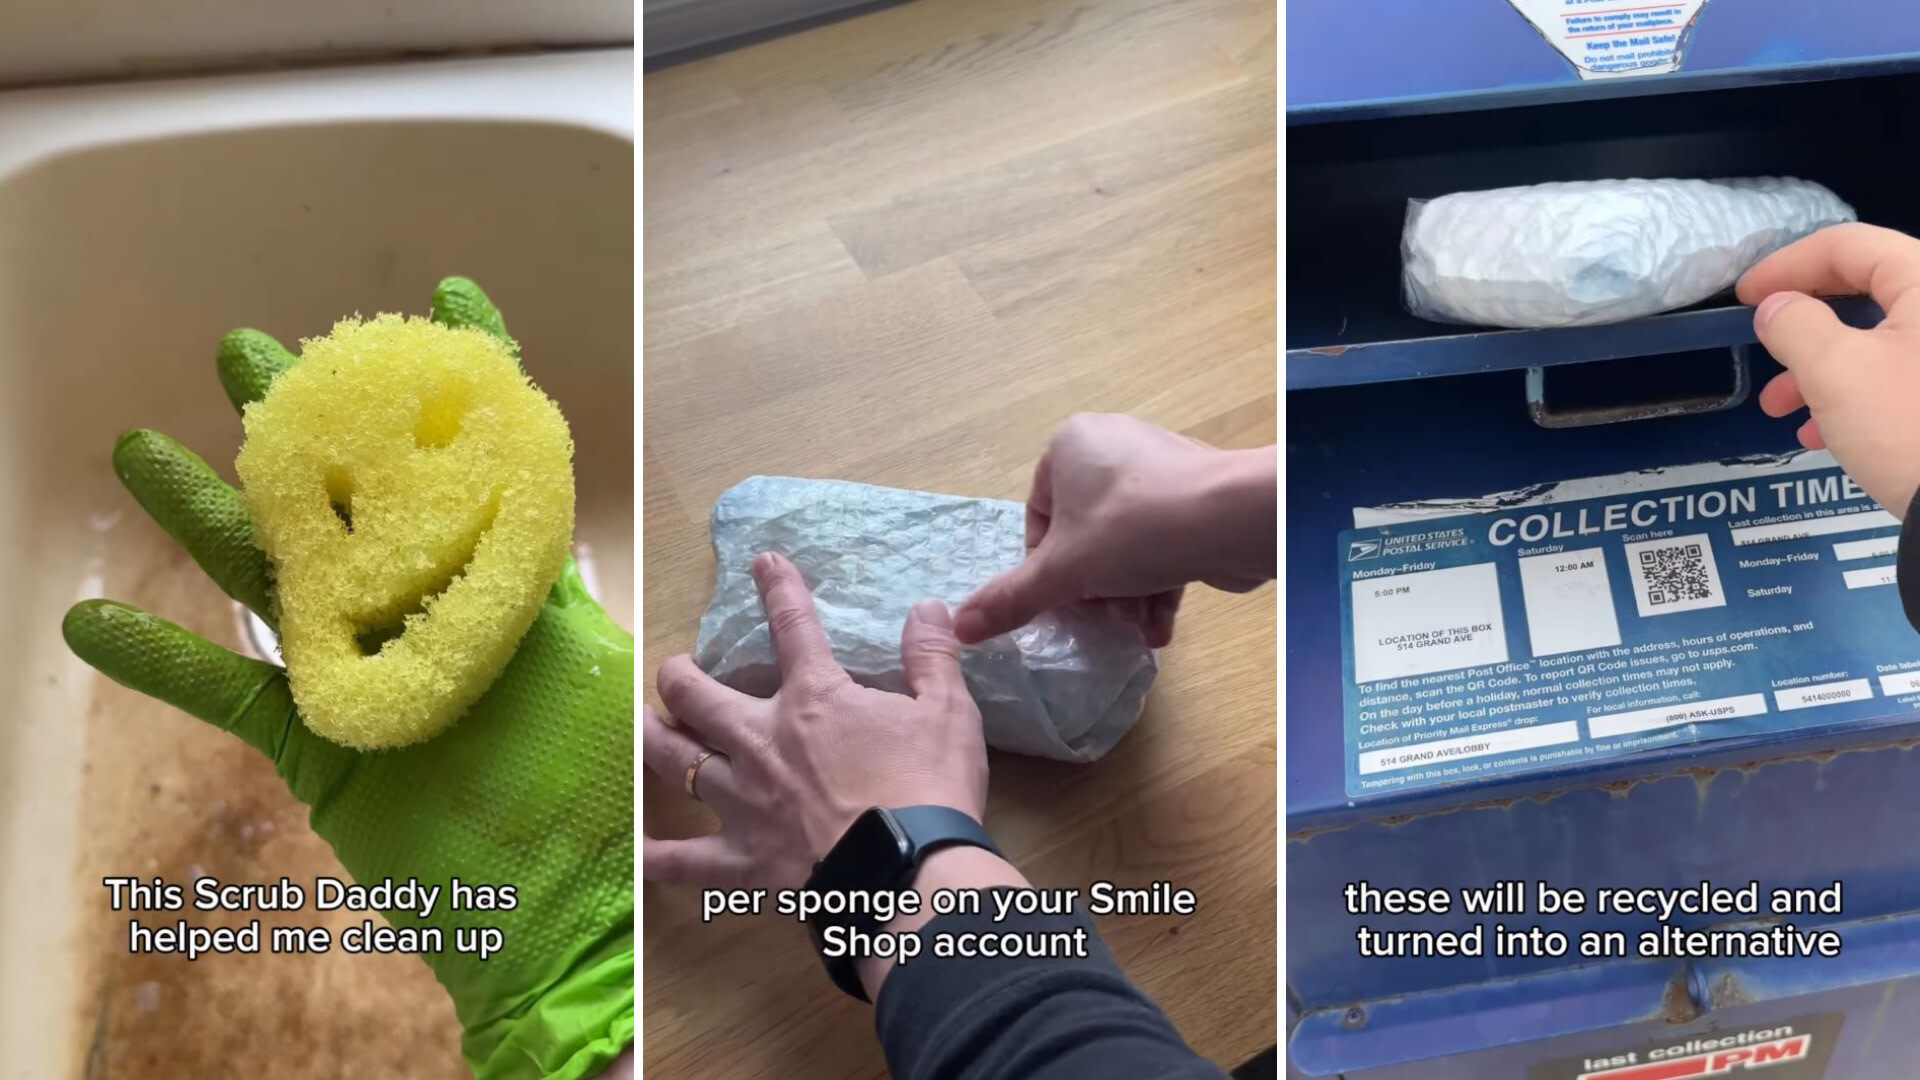 Scrub Daddy's send-back program sparks heated debate online: 'I know  there's good intentions behind this but 